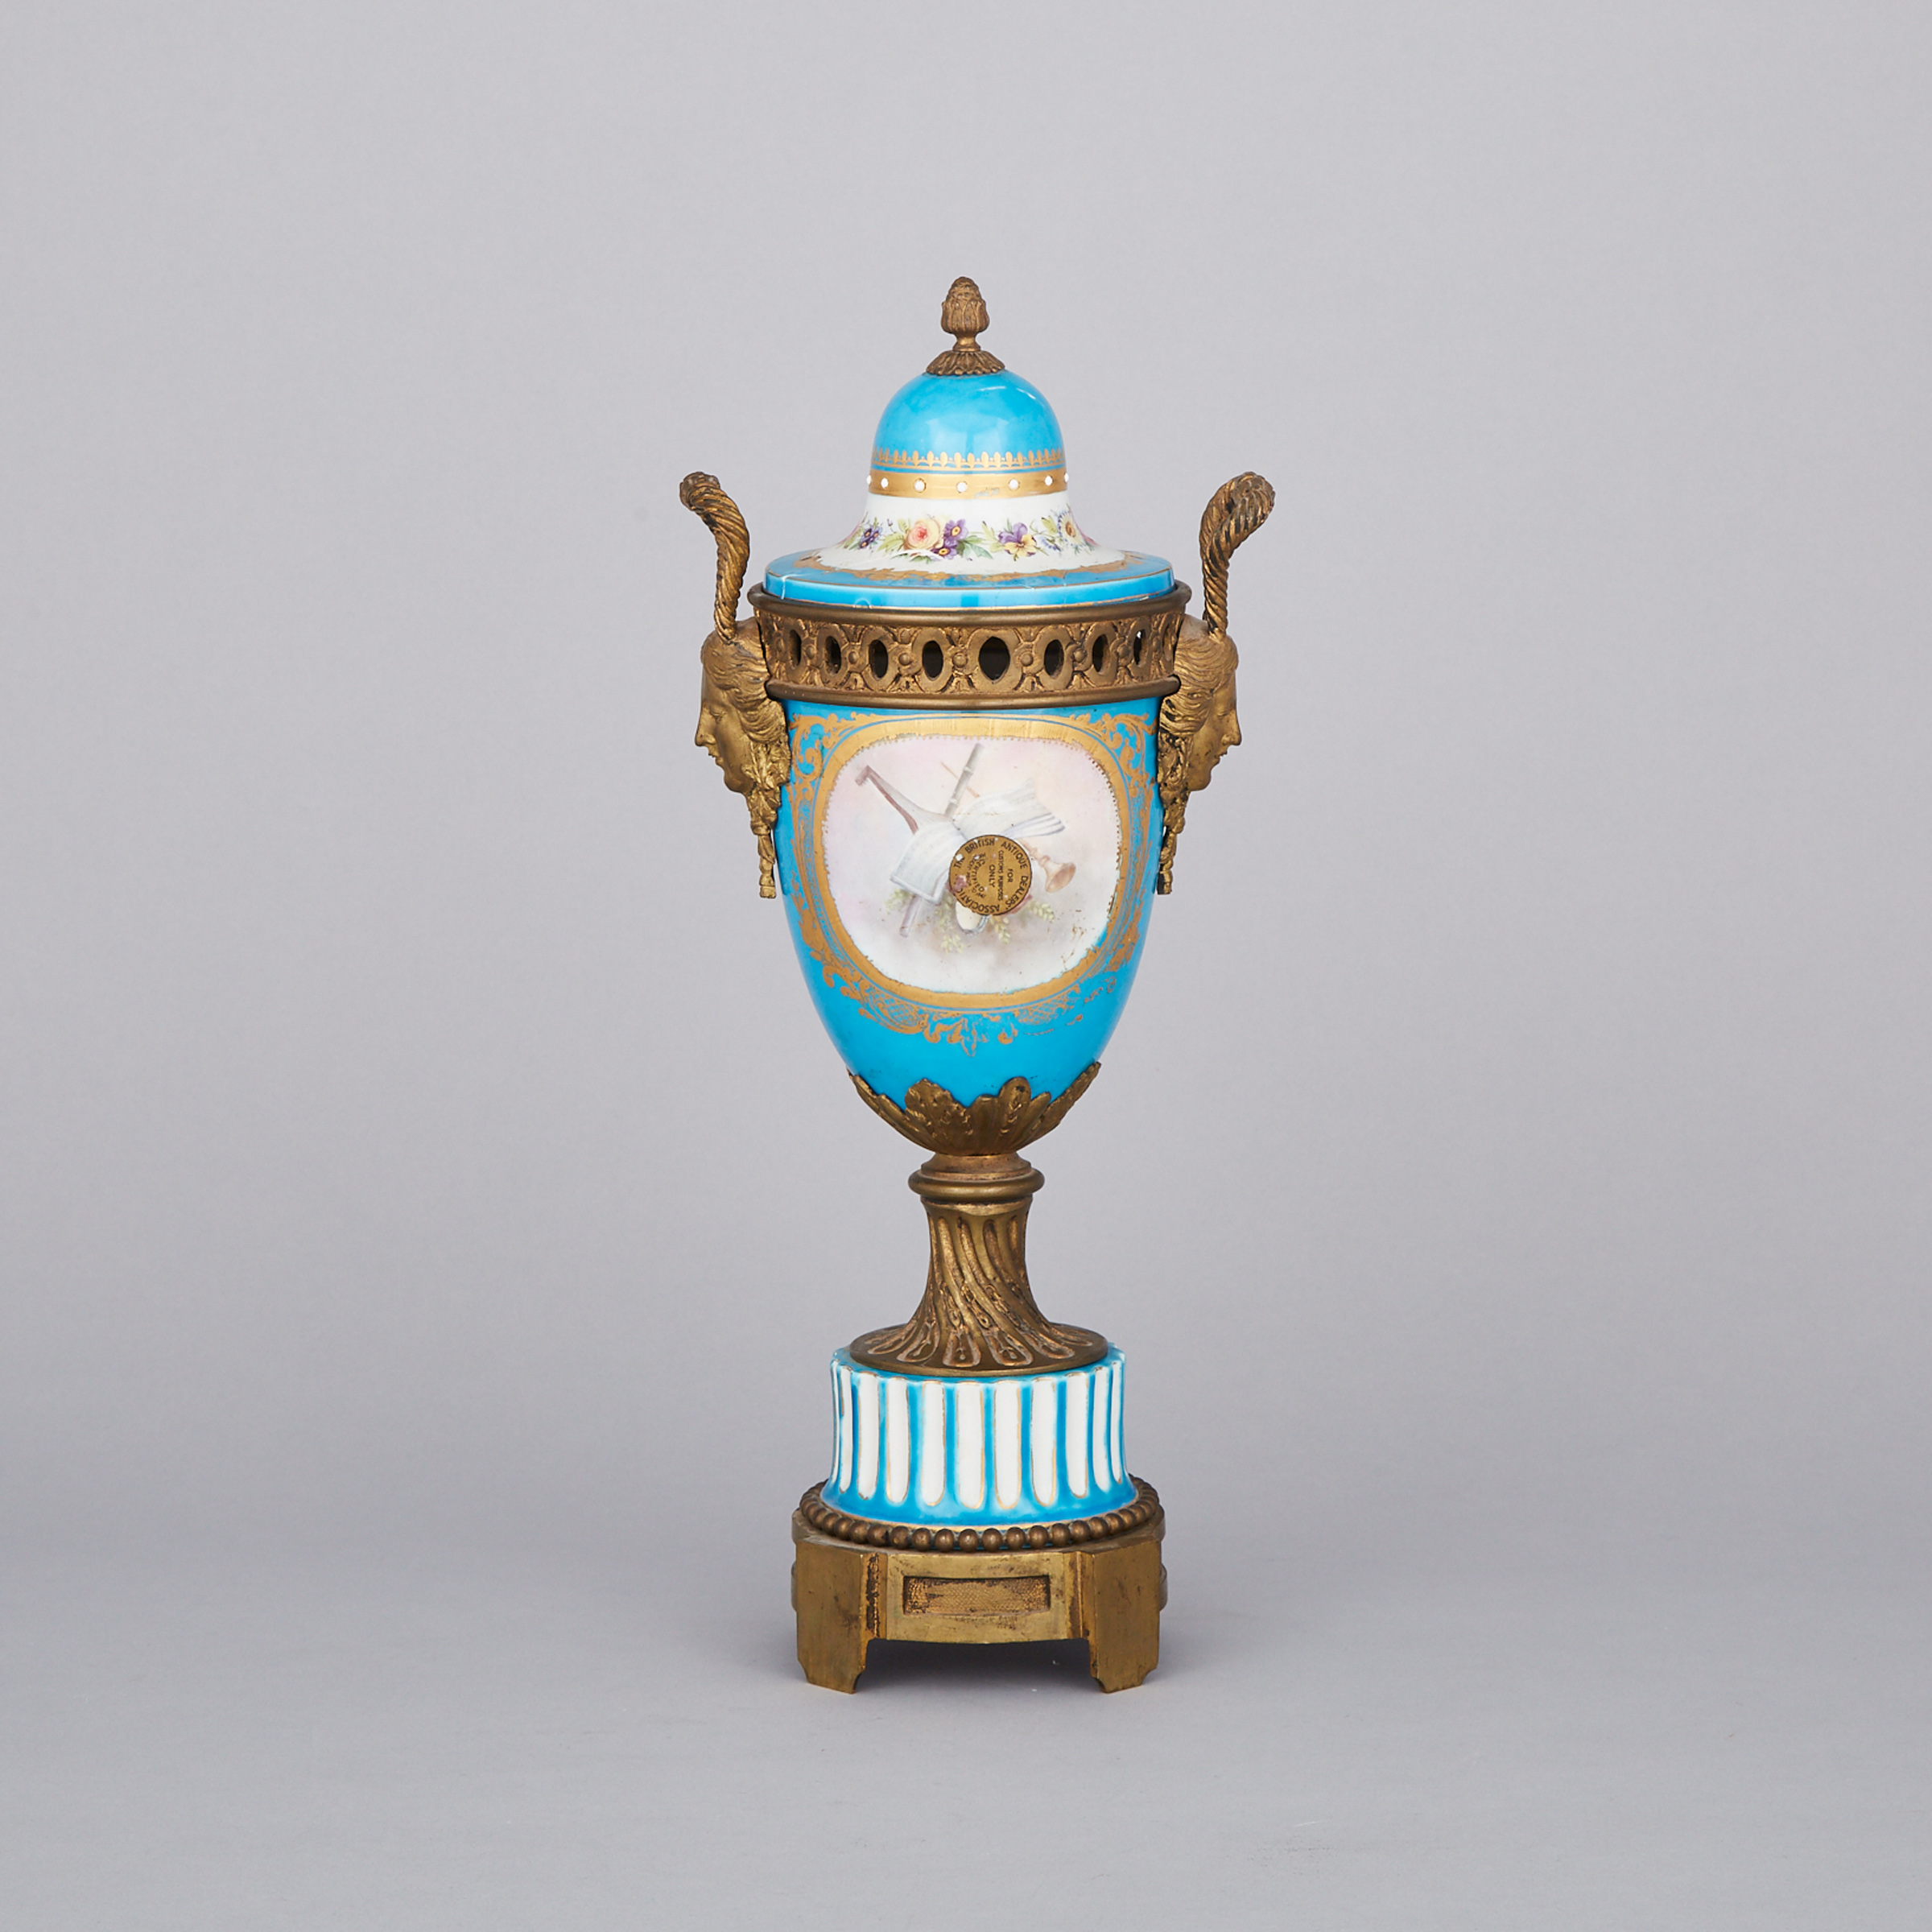 Ormolu Mounted ‘Sèvres’ Two-Handled Urn and Cover, late 19th century